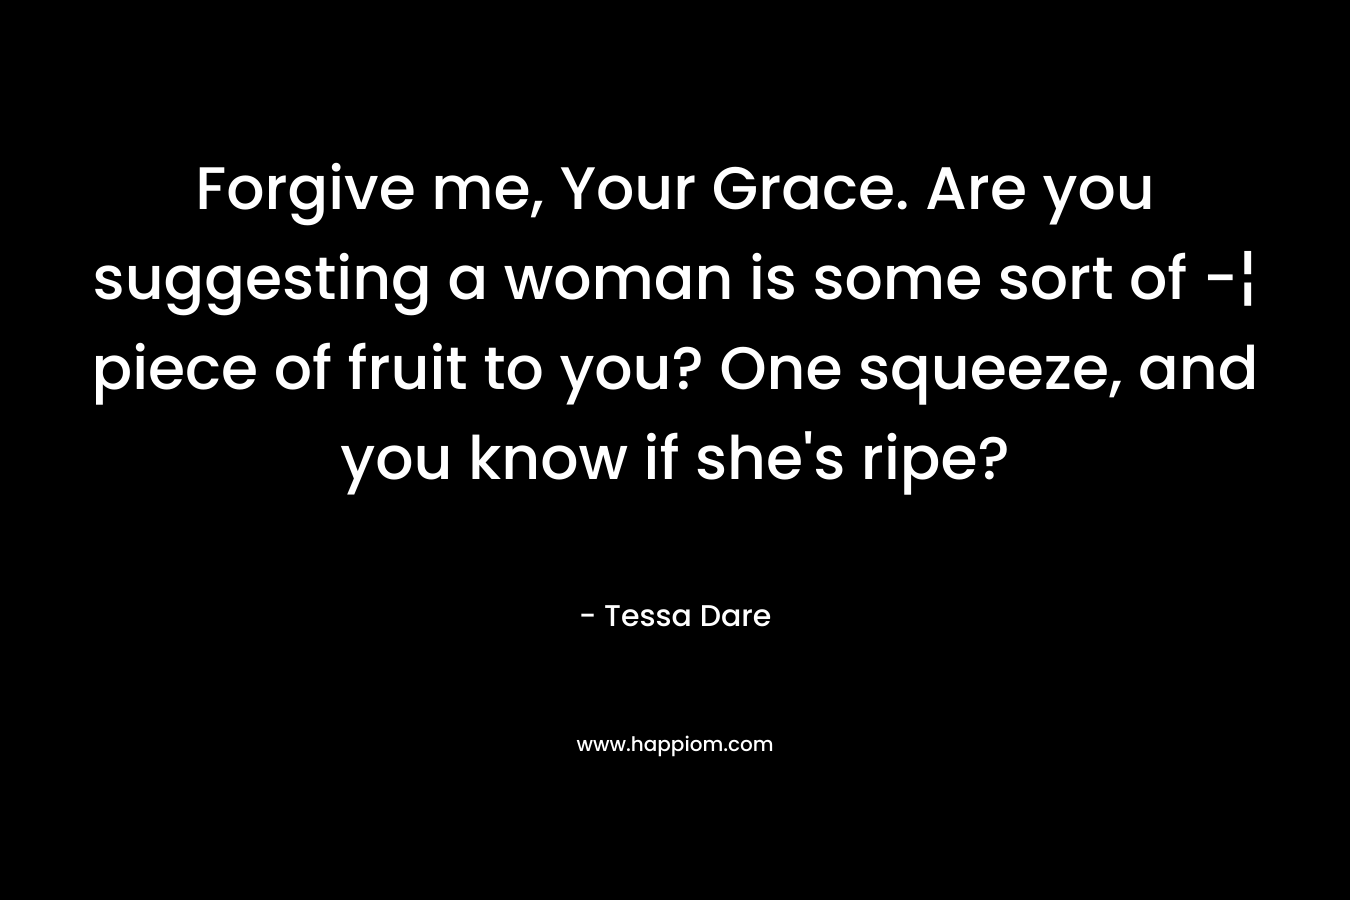 Forgive me, Your Grace. Are you suggesting a woman is some sort of -¦ piece of fruit to you? One squeeze, and you know if she's ripe?